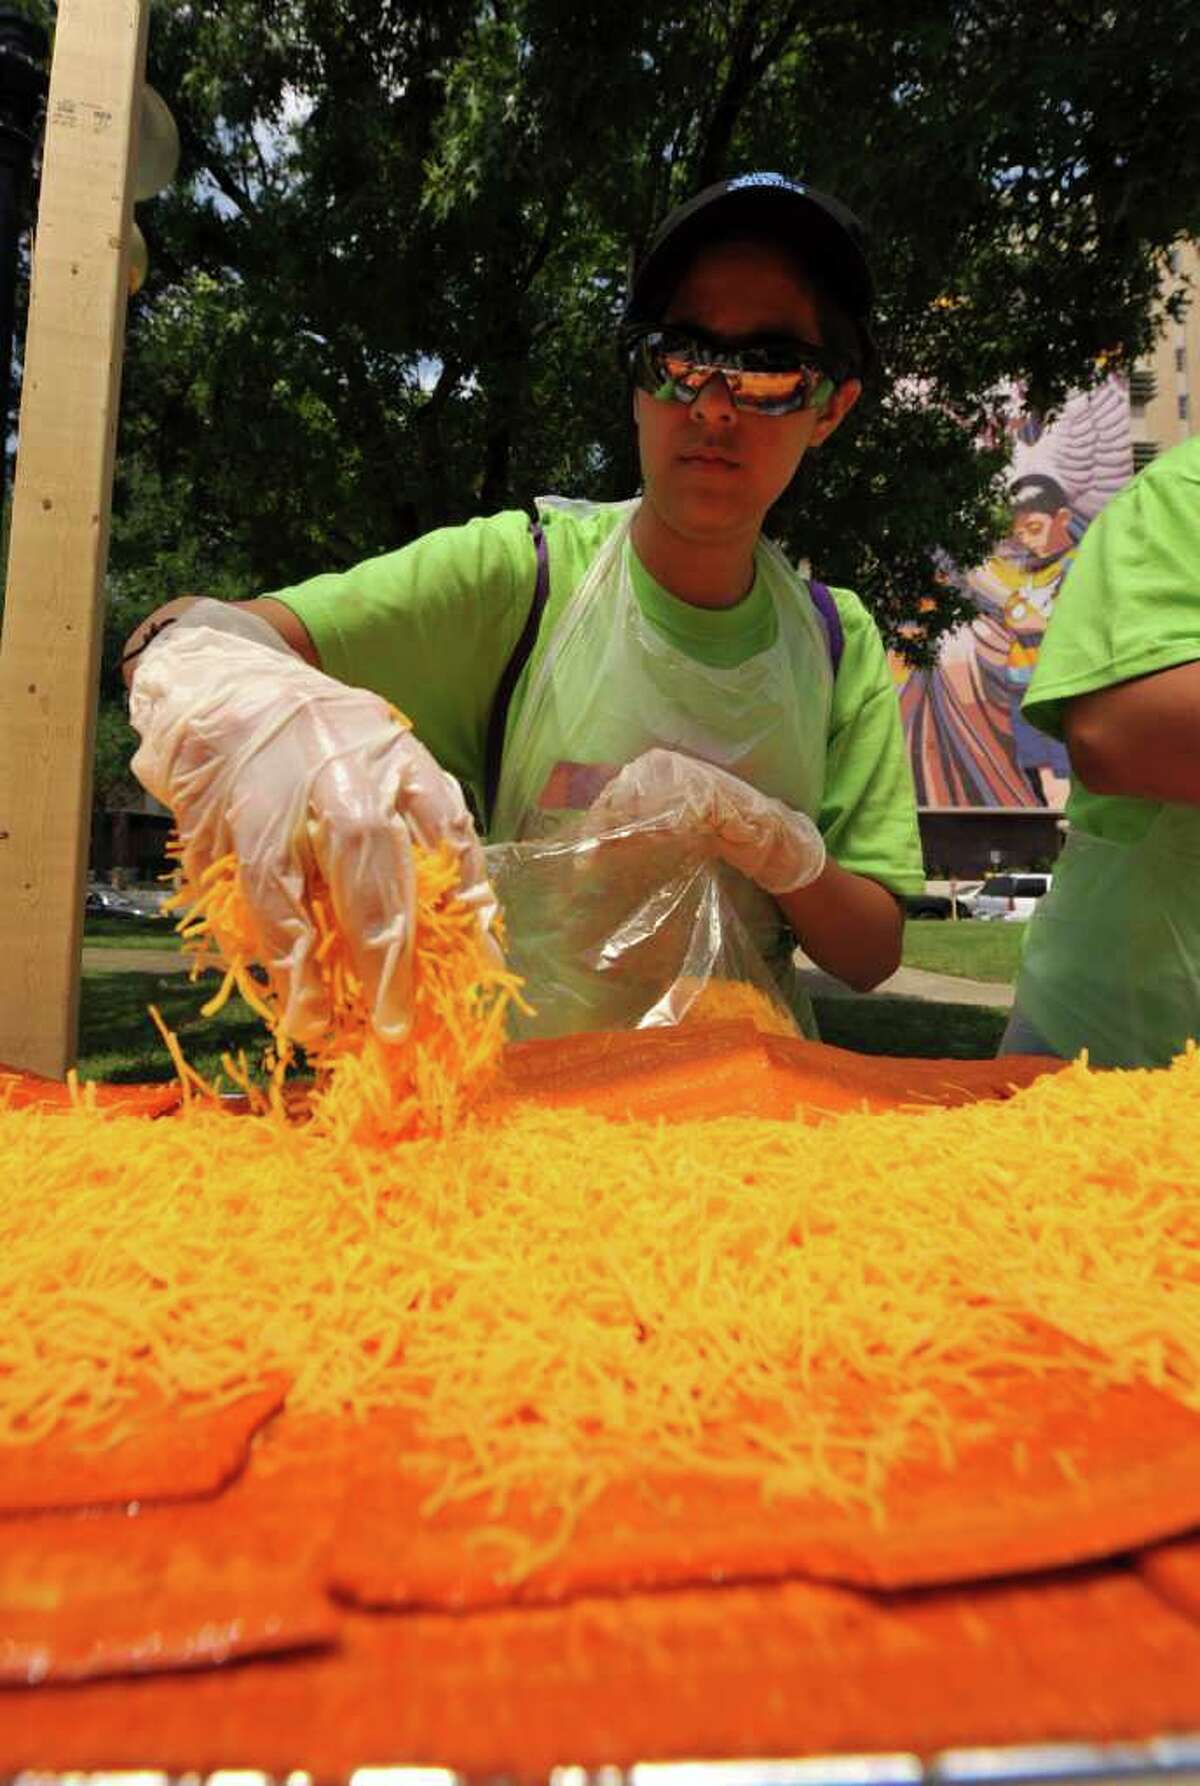 Susie Mitchell layers on some of the 1,500 pounds of Wisconsin Mild Cheddar cheese that made up the 300-foot-long enchilada made in Milam Park on April 9, 2011, as part of a collaboration between 20 local restaurants and the Rey Feo Consejo Foundation.